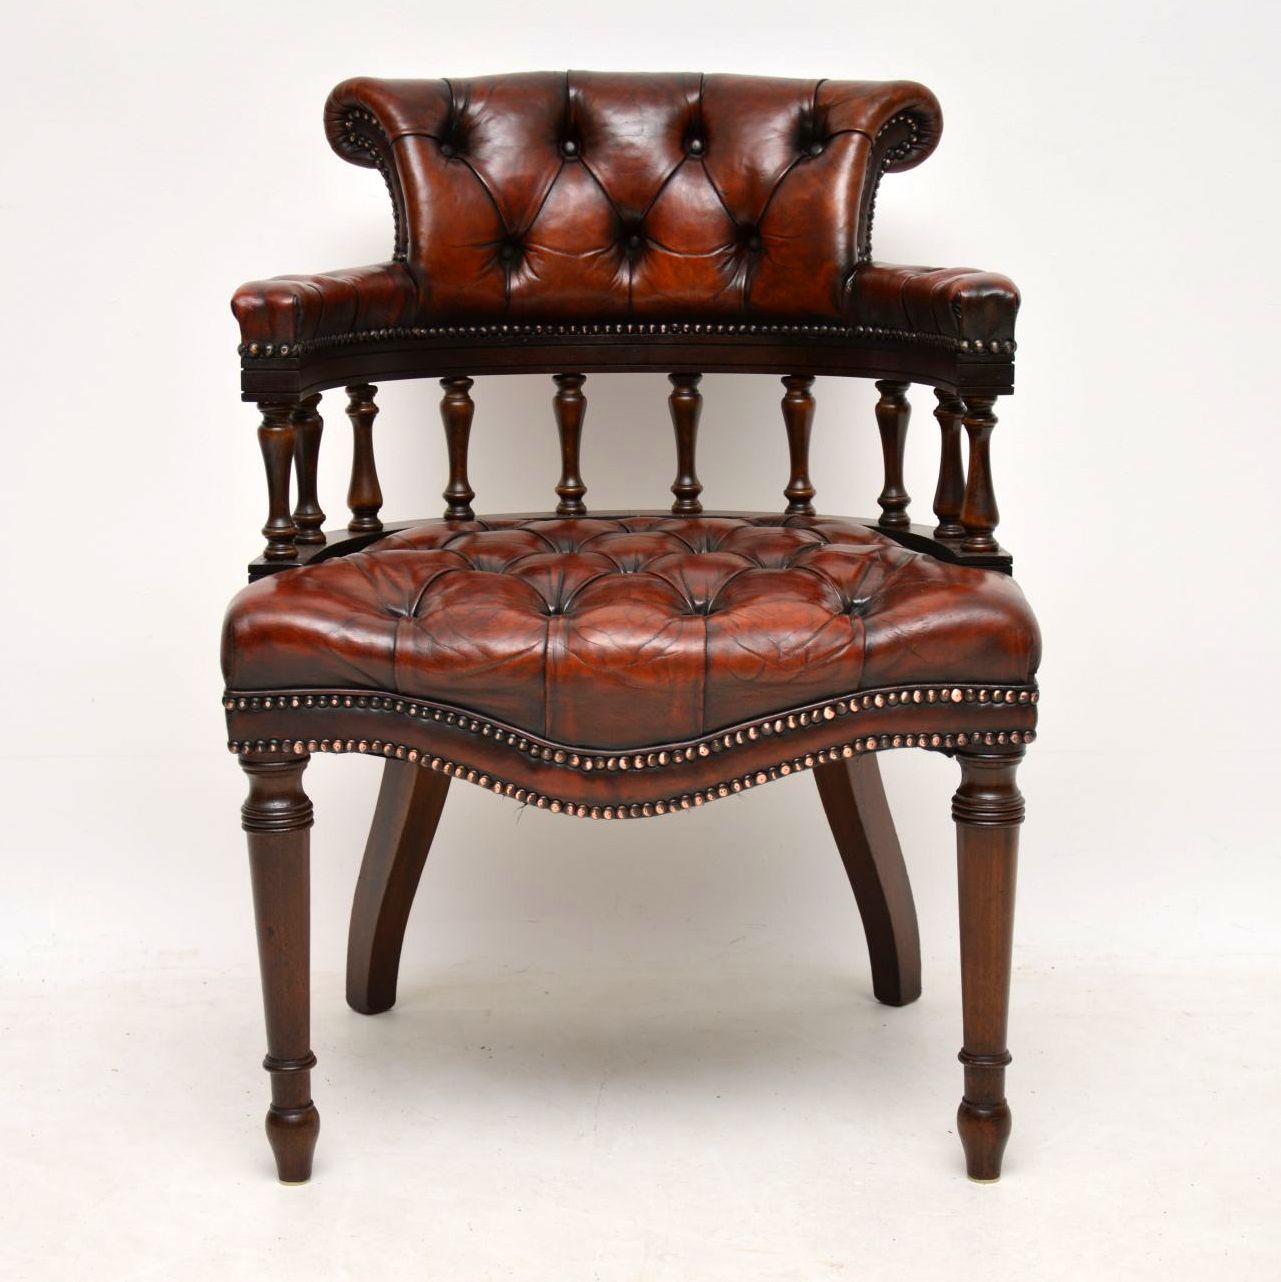 Antique deep buttoned leather and mahogany desk armchair in good original condition, dating to around the 1930s period. It has a great overall shape, so is comfortable and very practicable for use in front of a desk. I particularly like the way the